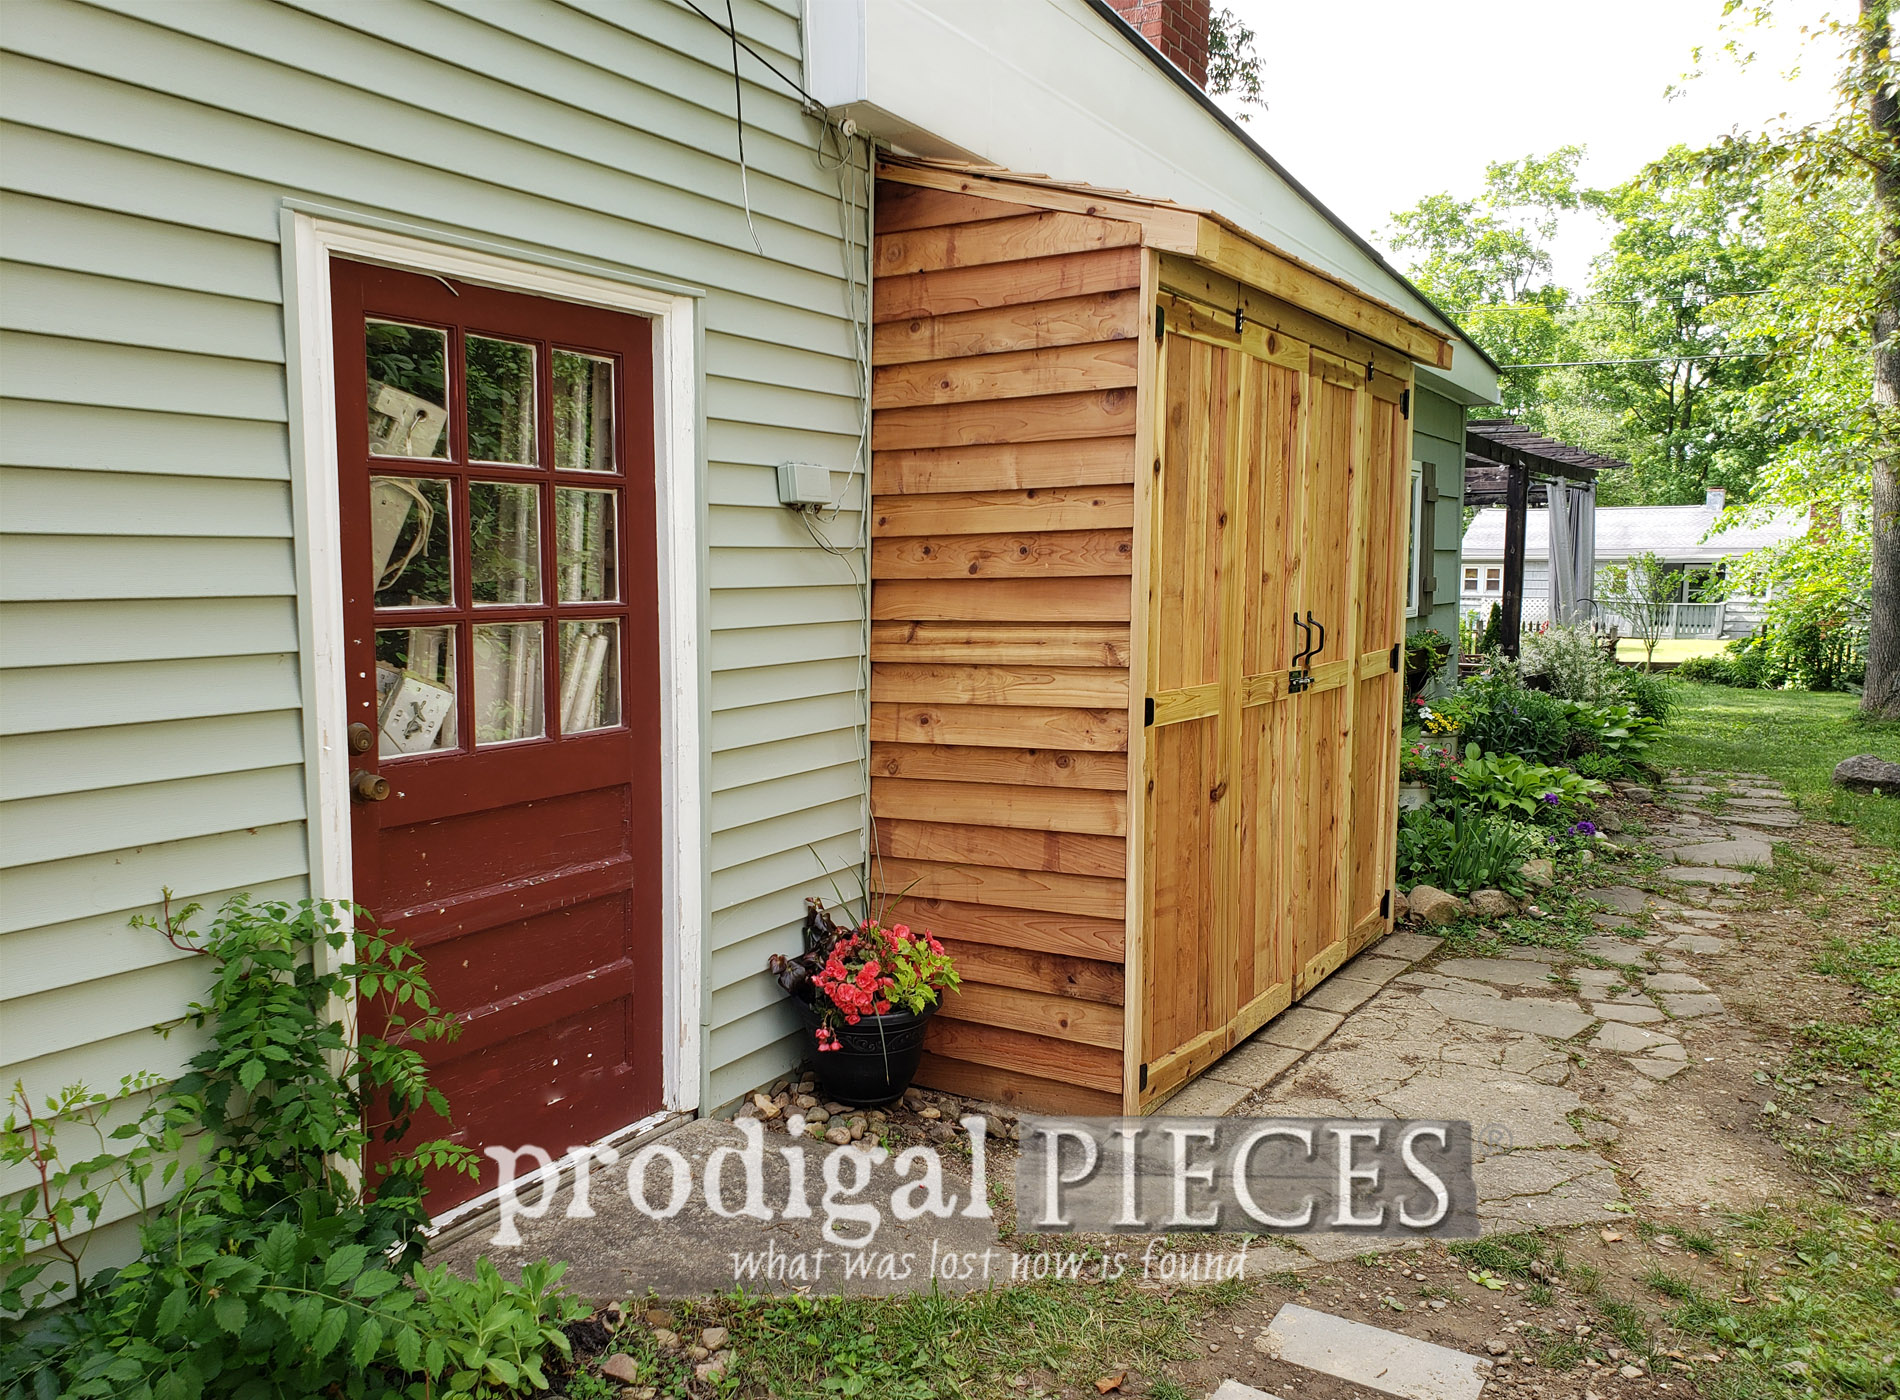 Featured DIY Bike Garden Shed for Outdoor Storage | Plans & Video at Prodigal Pieces | prodigalpieces.com #prodigalpieces #diy #home #storage #outdoor #shed